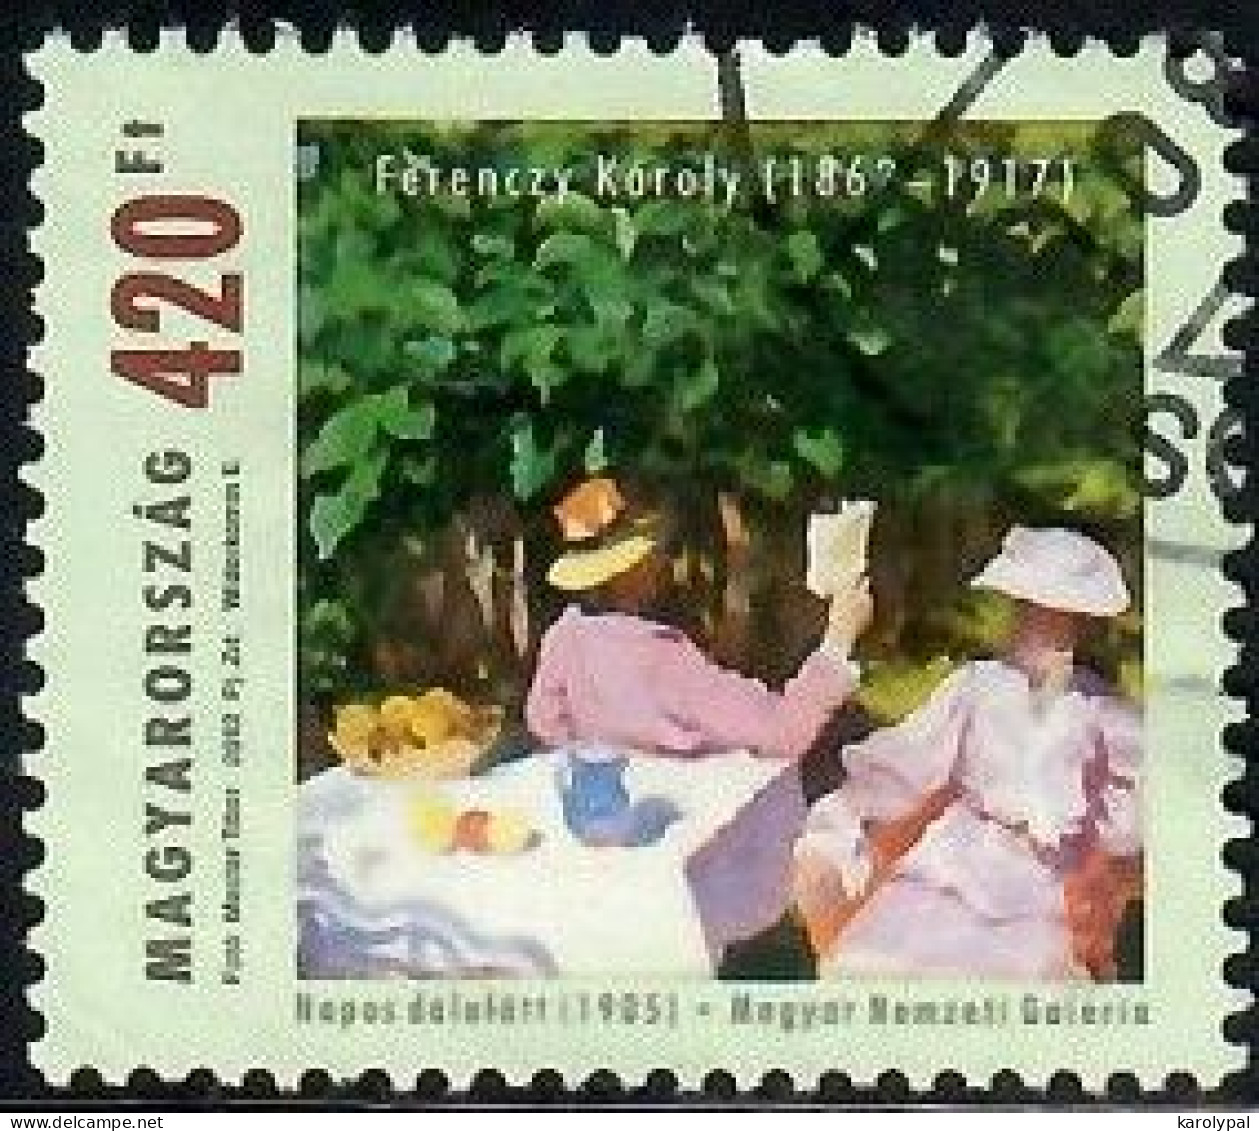 Hungary, 2012, Used, Sunny Morning (1905), By Károly Ferenczy, Mi. Nr.5542, - Used Stamps